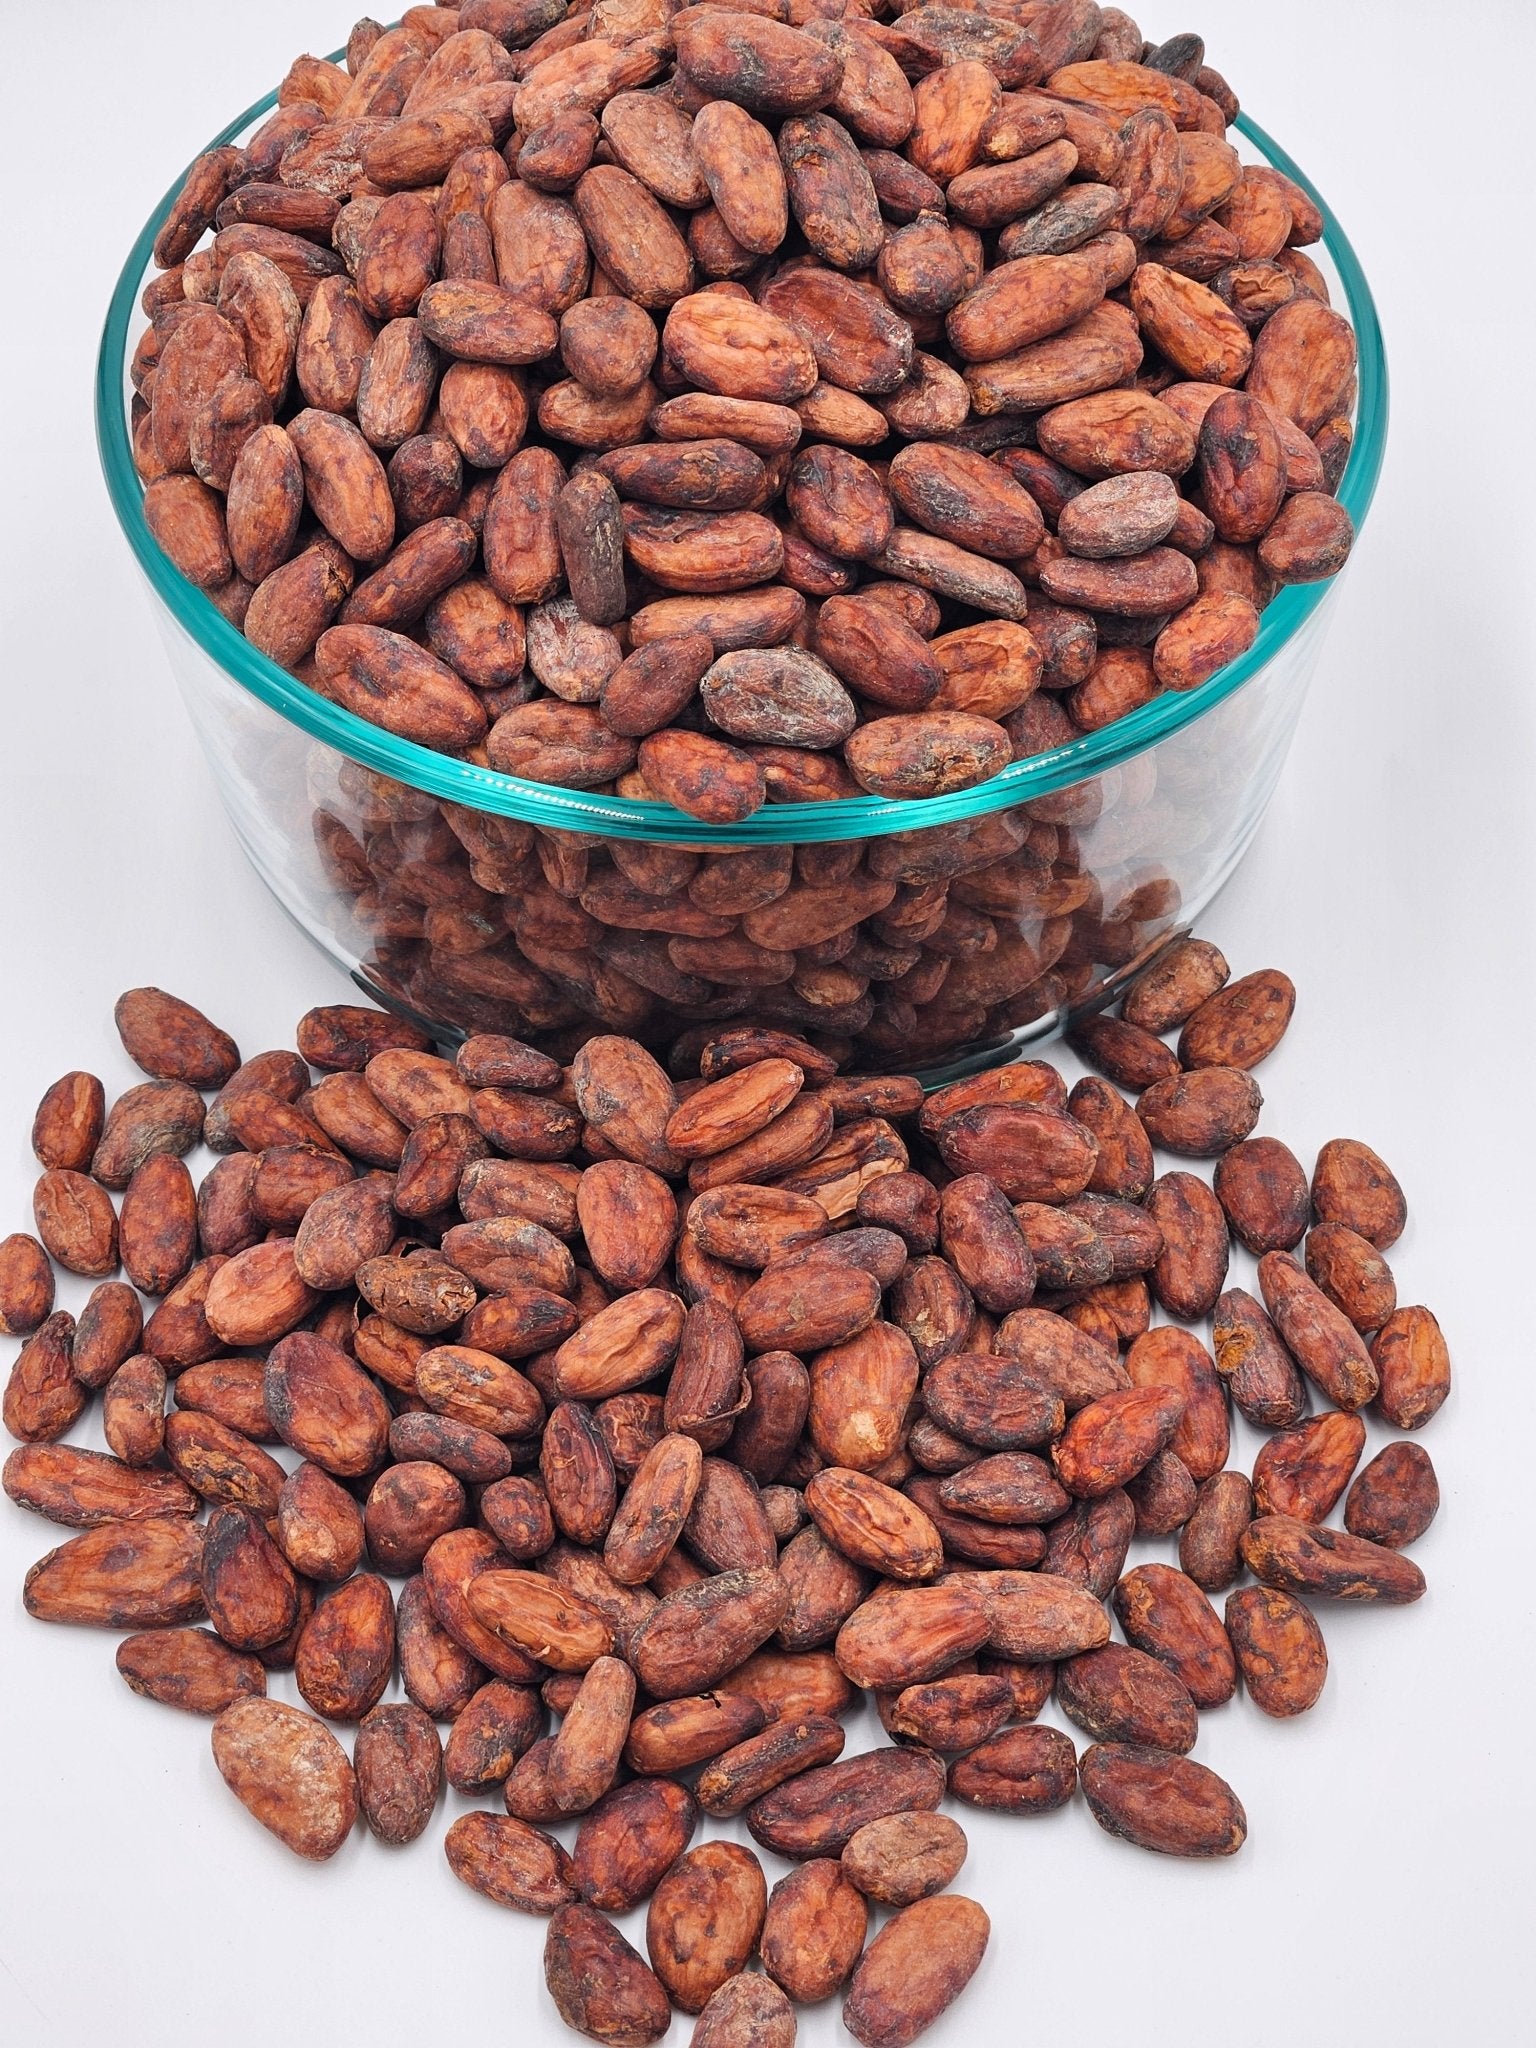 ***【3 Pack】- Cacao Beans 16 oz - Natural Zing